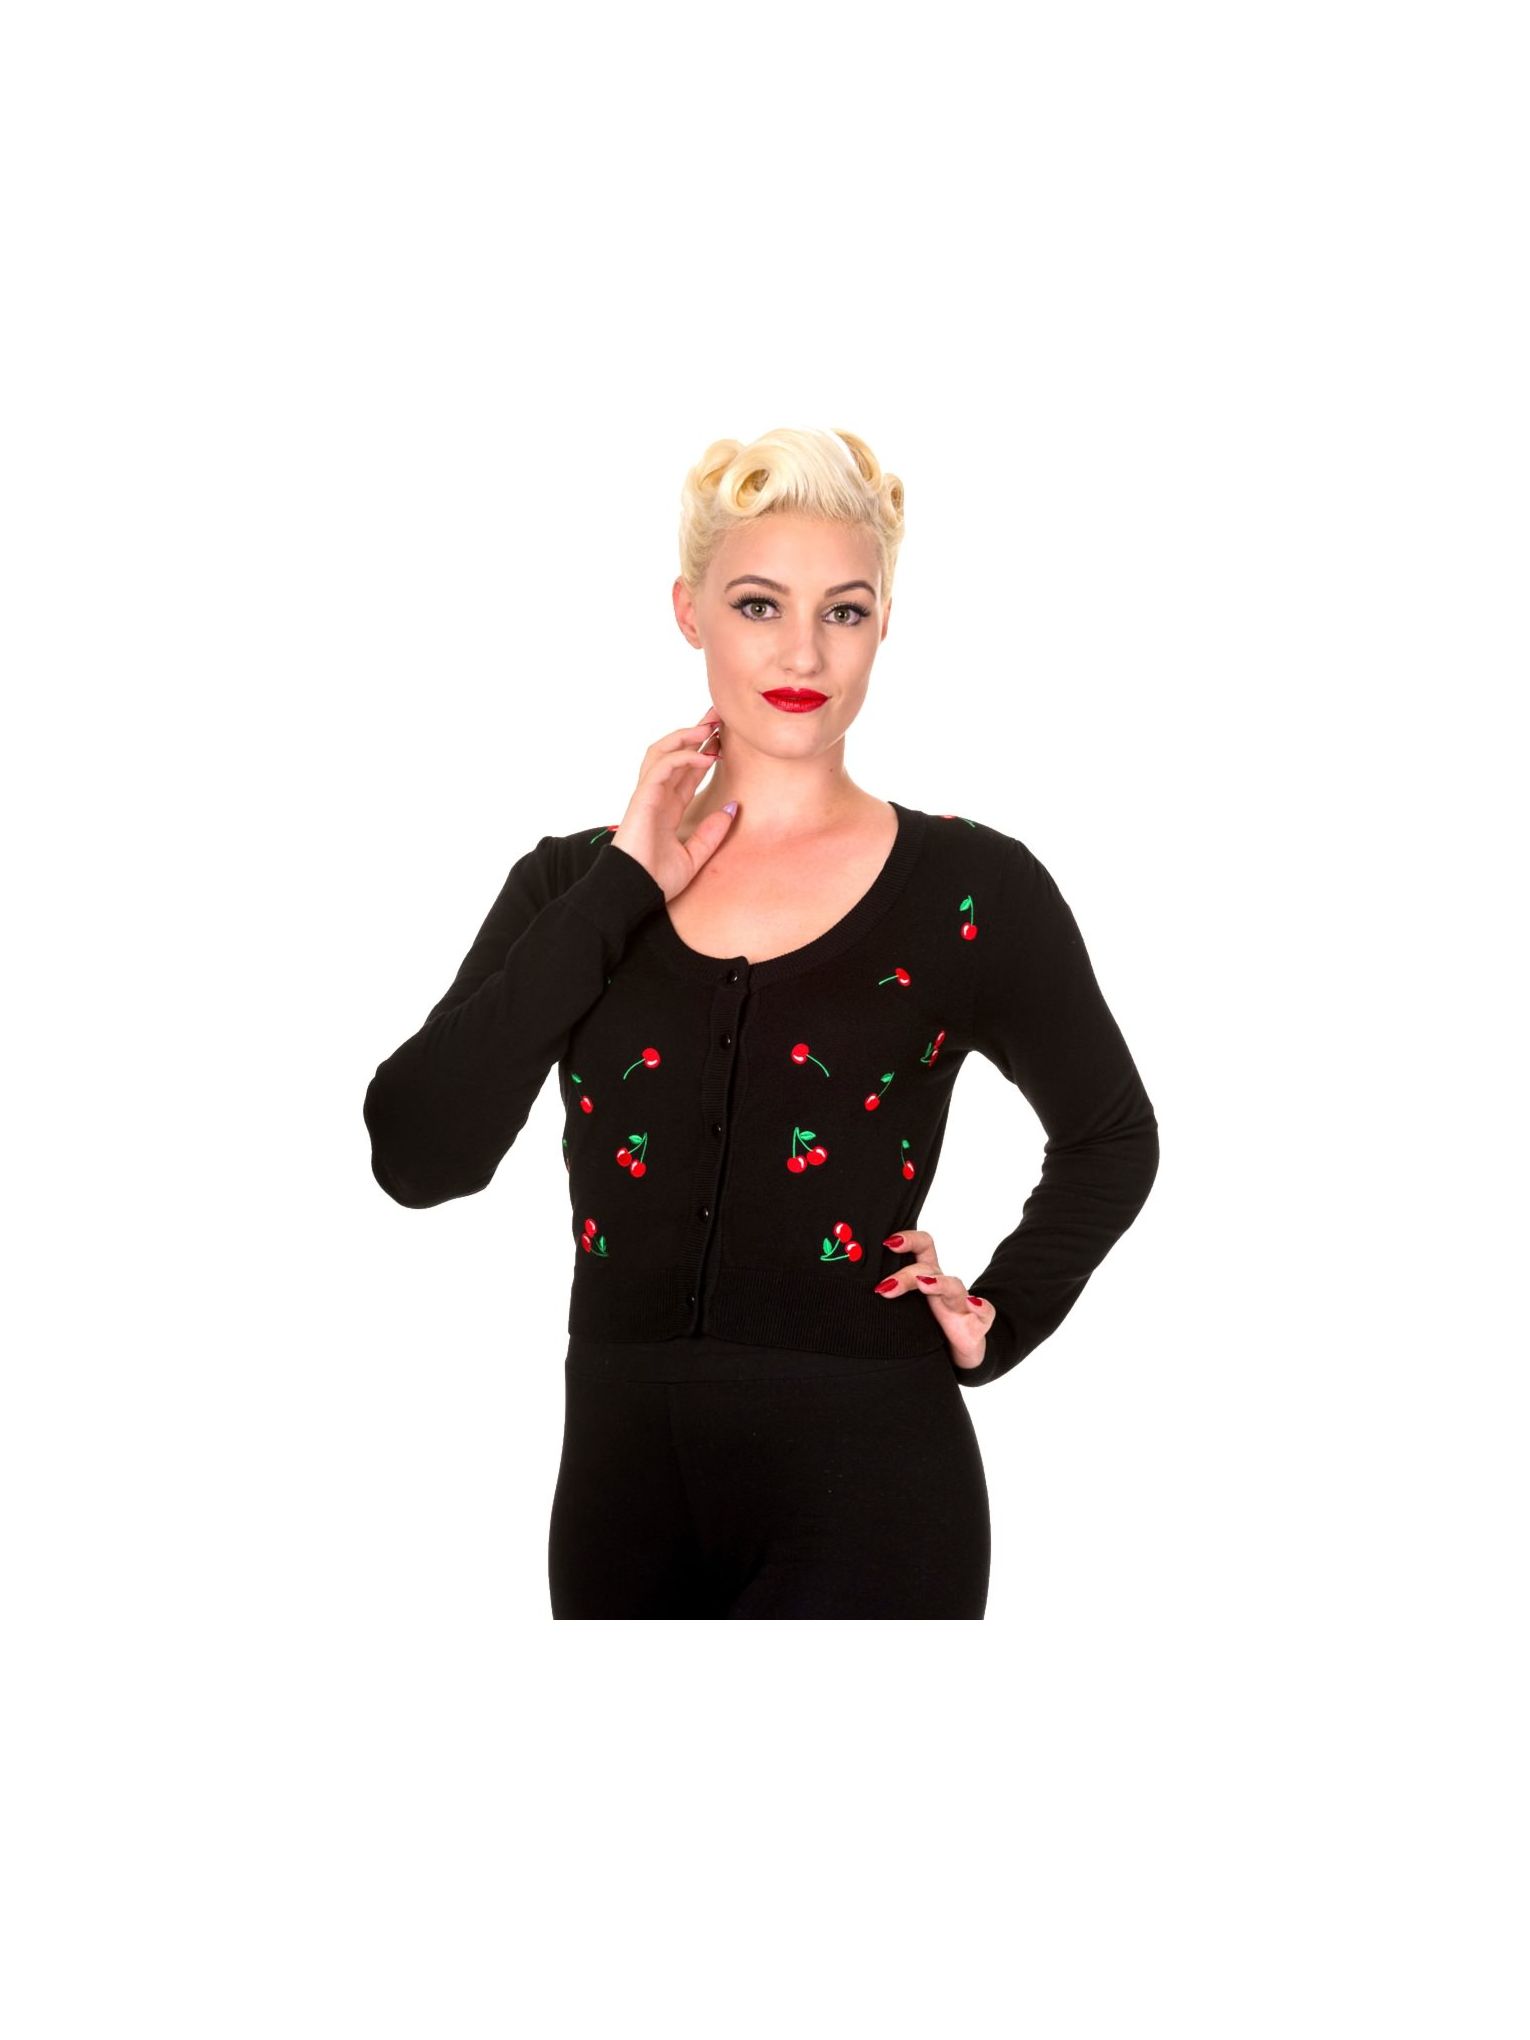 Banned Cherry Black Cardigan Top Rockabilly Retro 50's Pin Up Vintage Cherries 